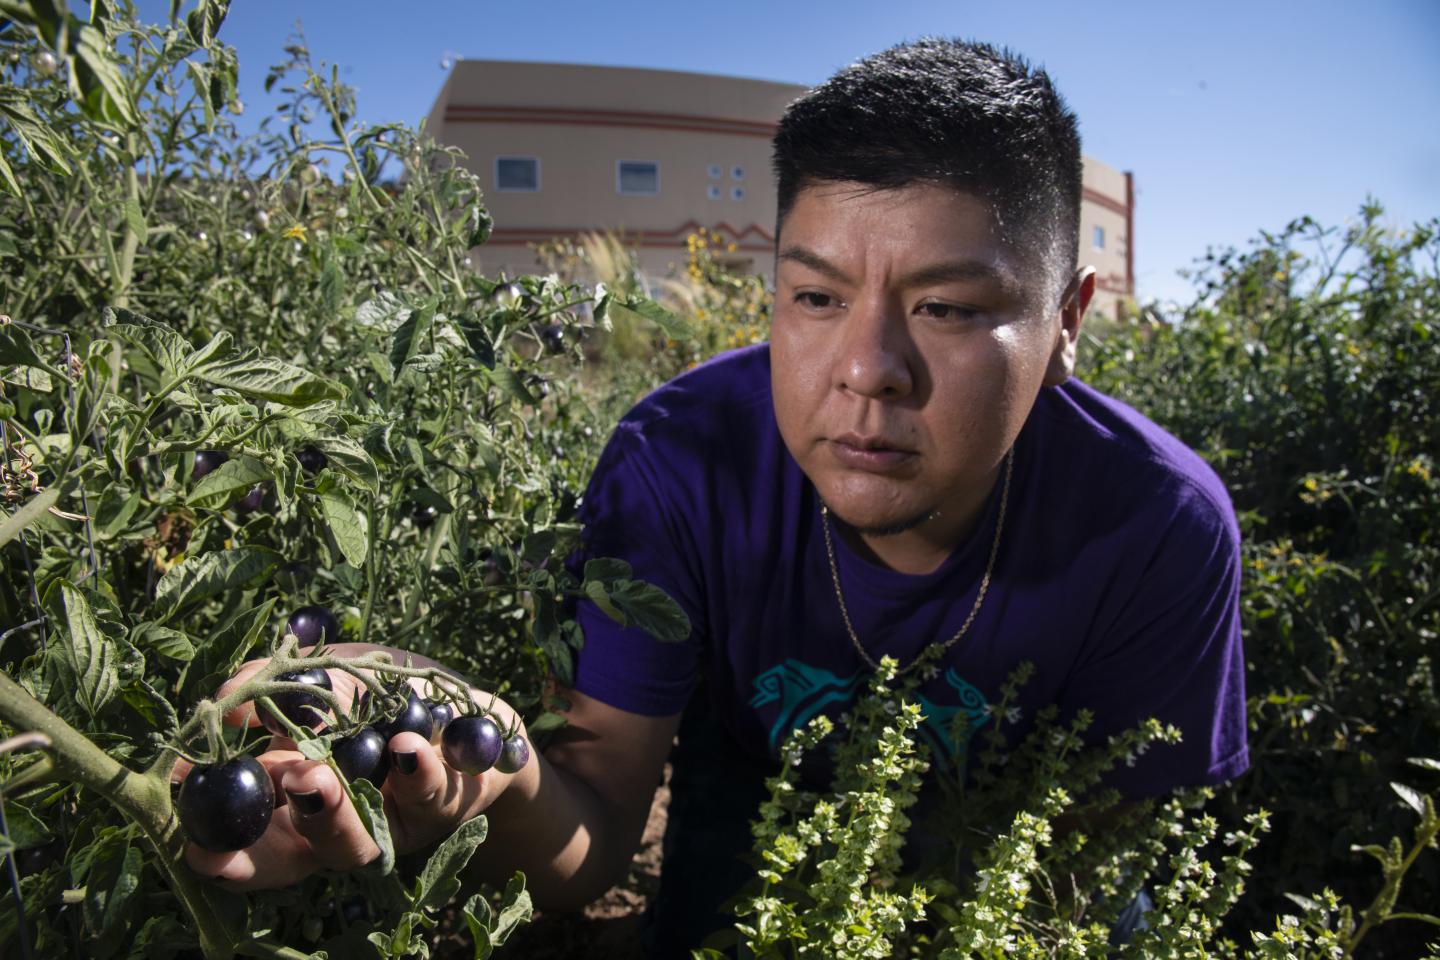 Institute of American Indian Arts (IAIA)1994 Land-Grant Tribal College and University (TCU) Land-Grant Research Assistant Kyle Kootswaytewa checks on the health of black tomato in the IAIA Demonstration Garden, in Santa Fe, NM